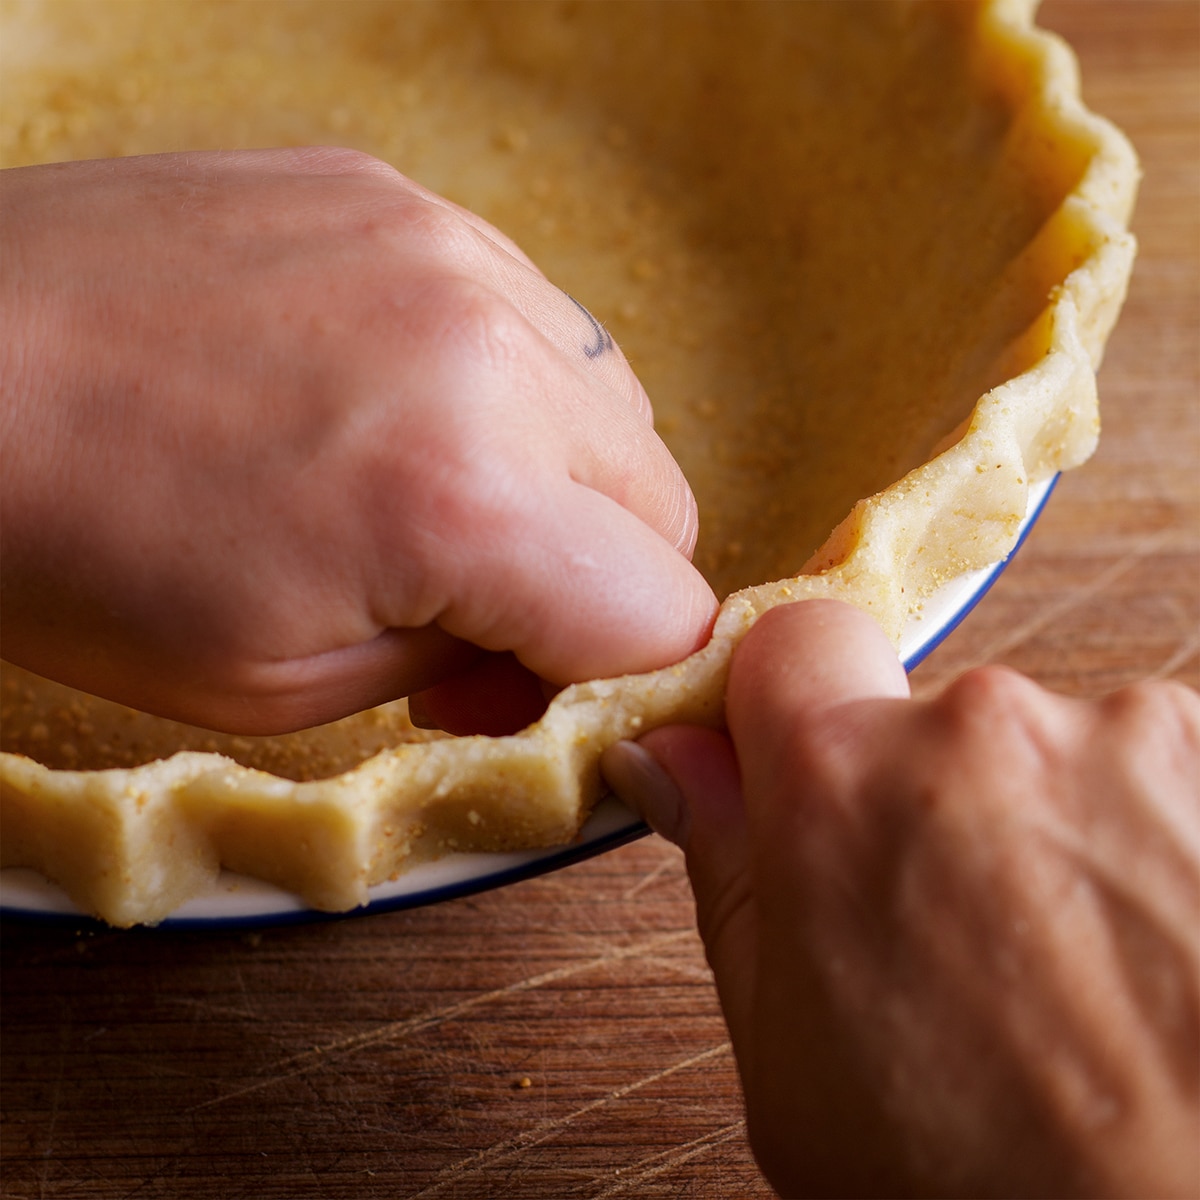 Someone using their fingers to crimp the edges of a pie crust inside a pie plate.